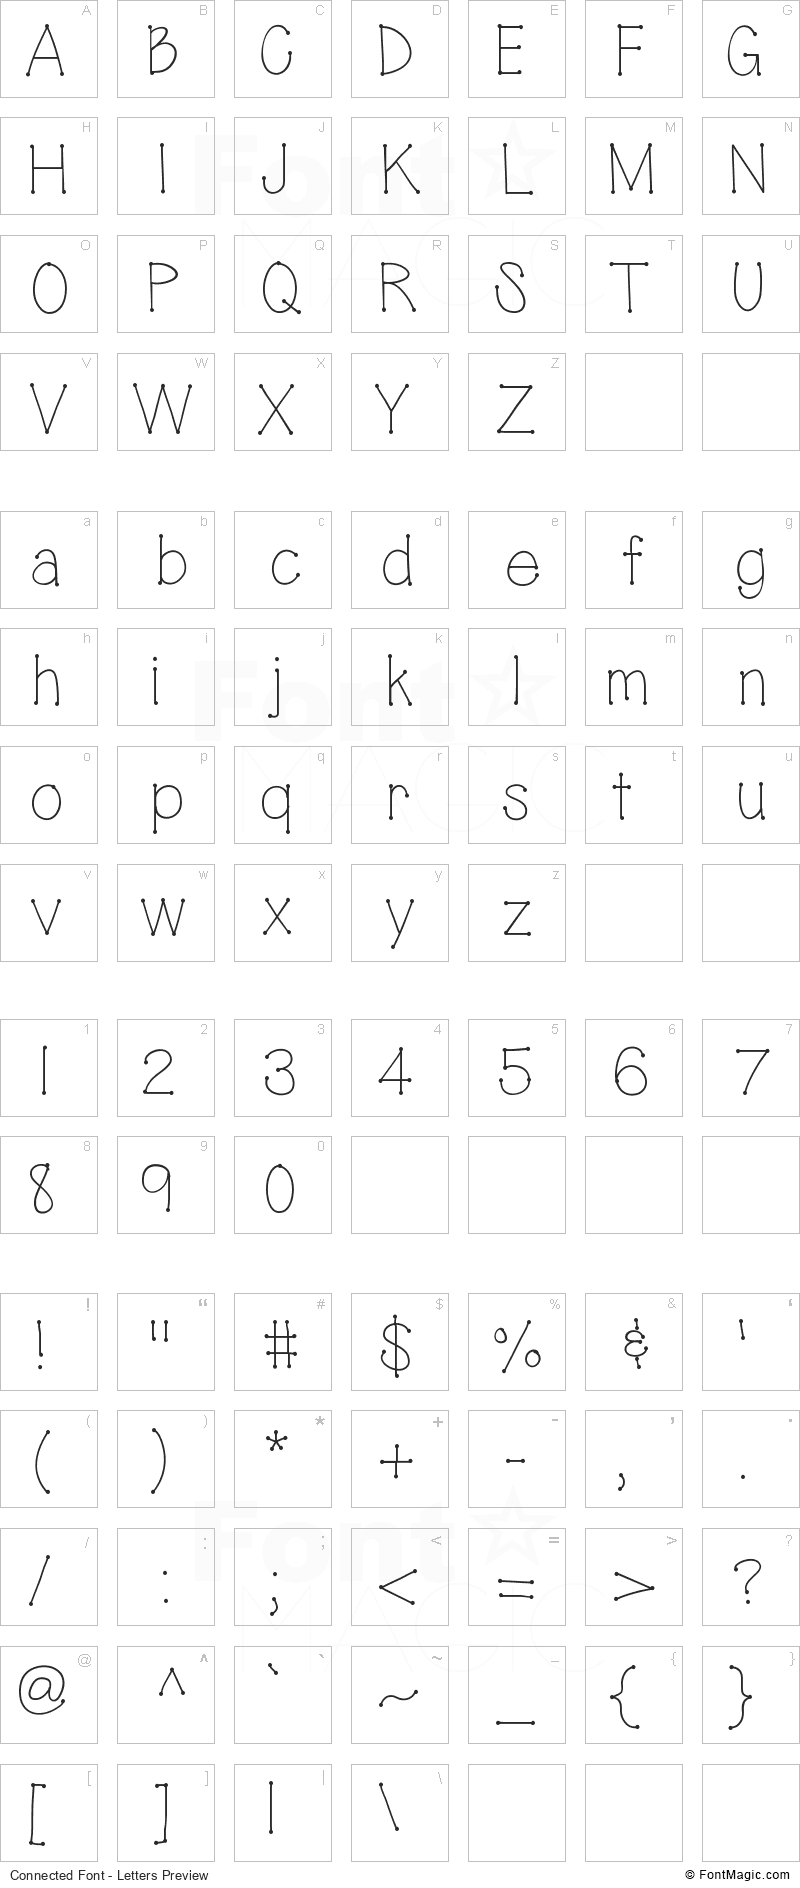 Connected Font - All Latters Preview Chart